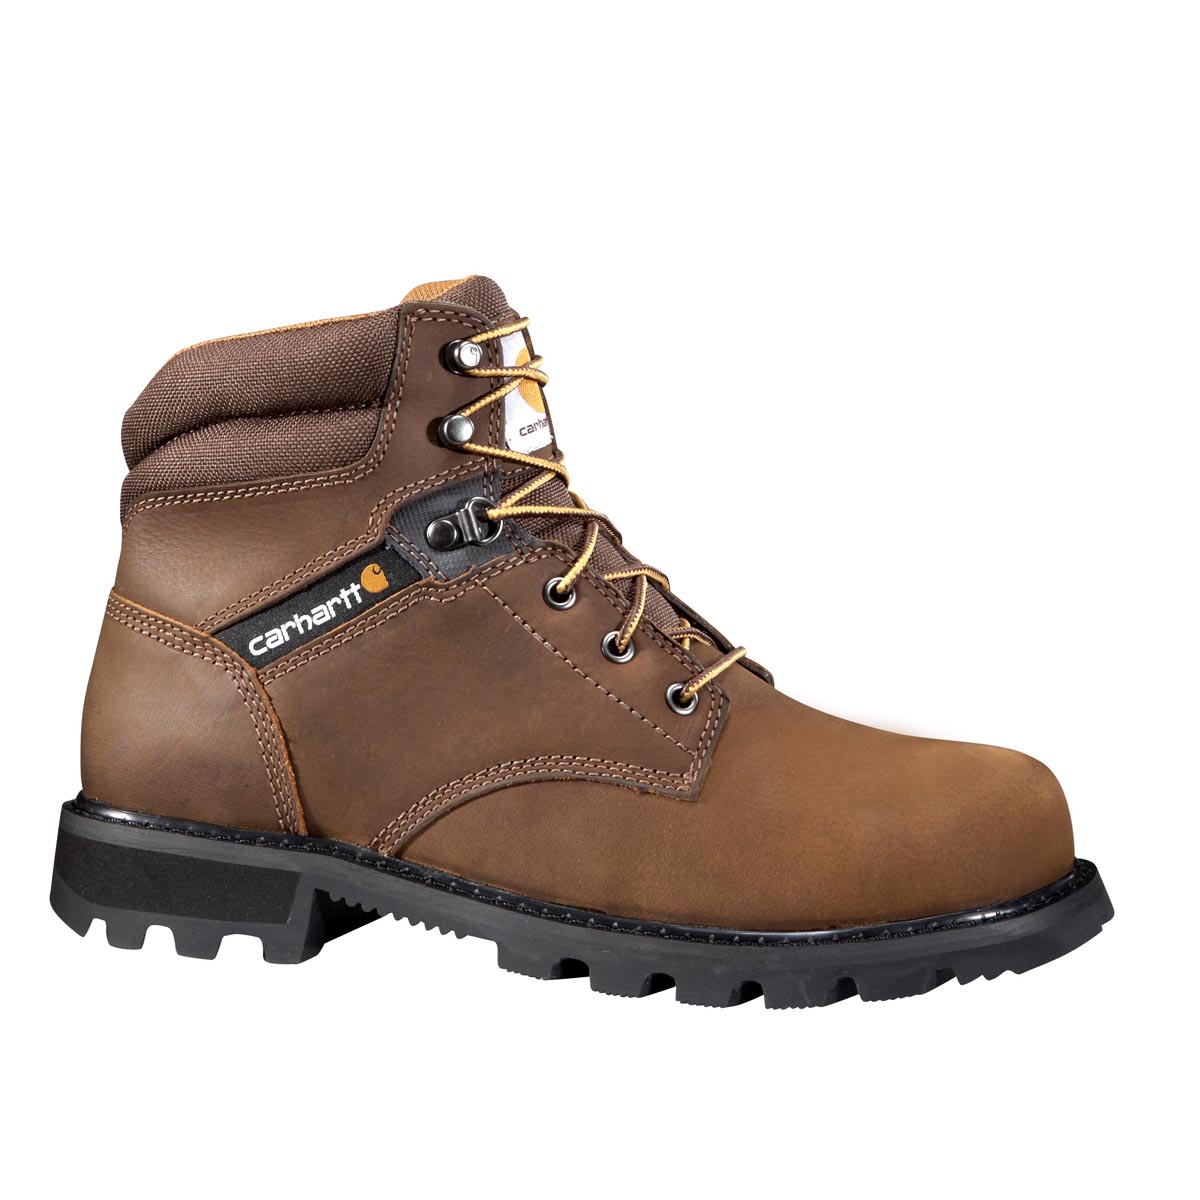 Carhartt Mens 6 Inch Brown Work Boot Non Safety Toe